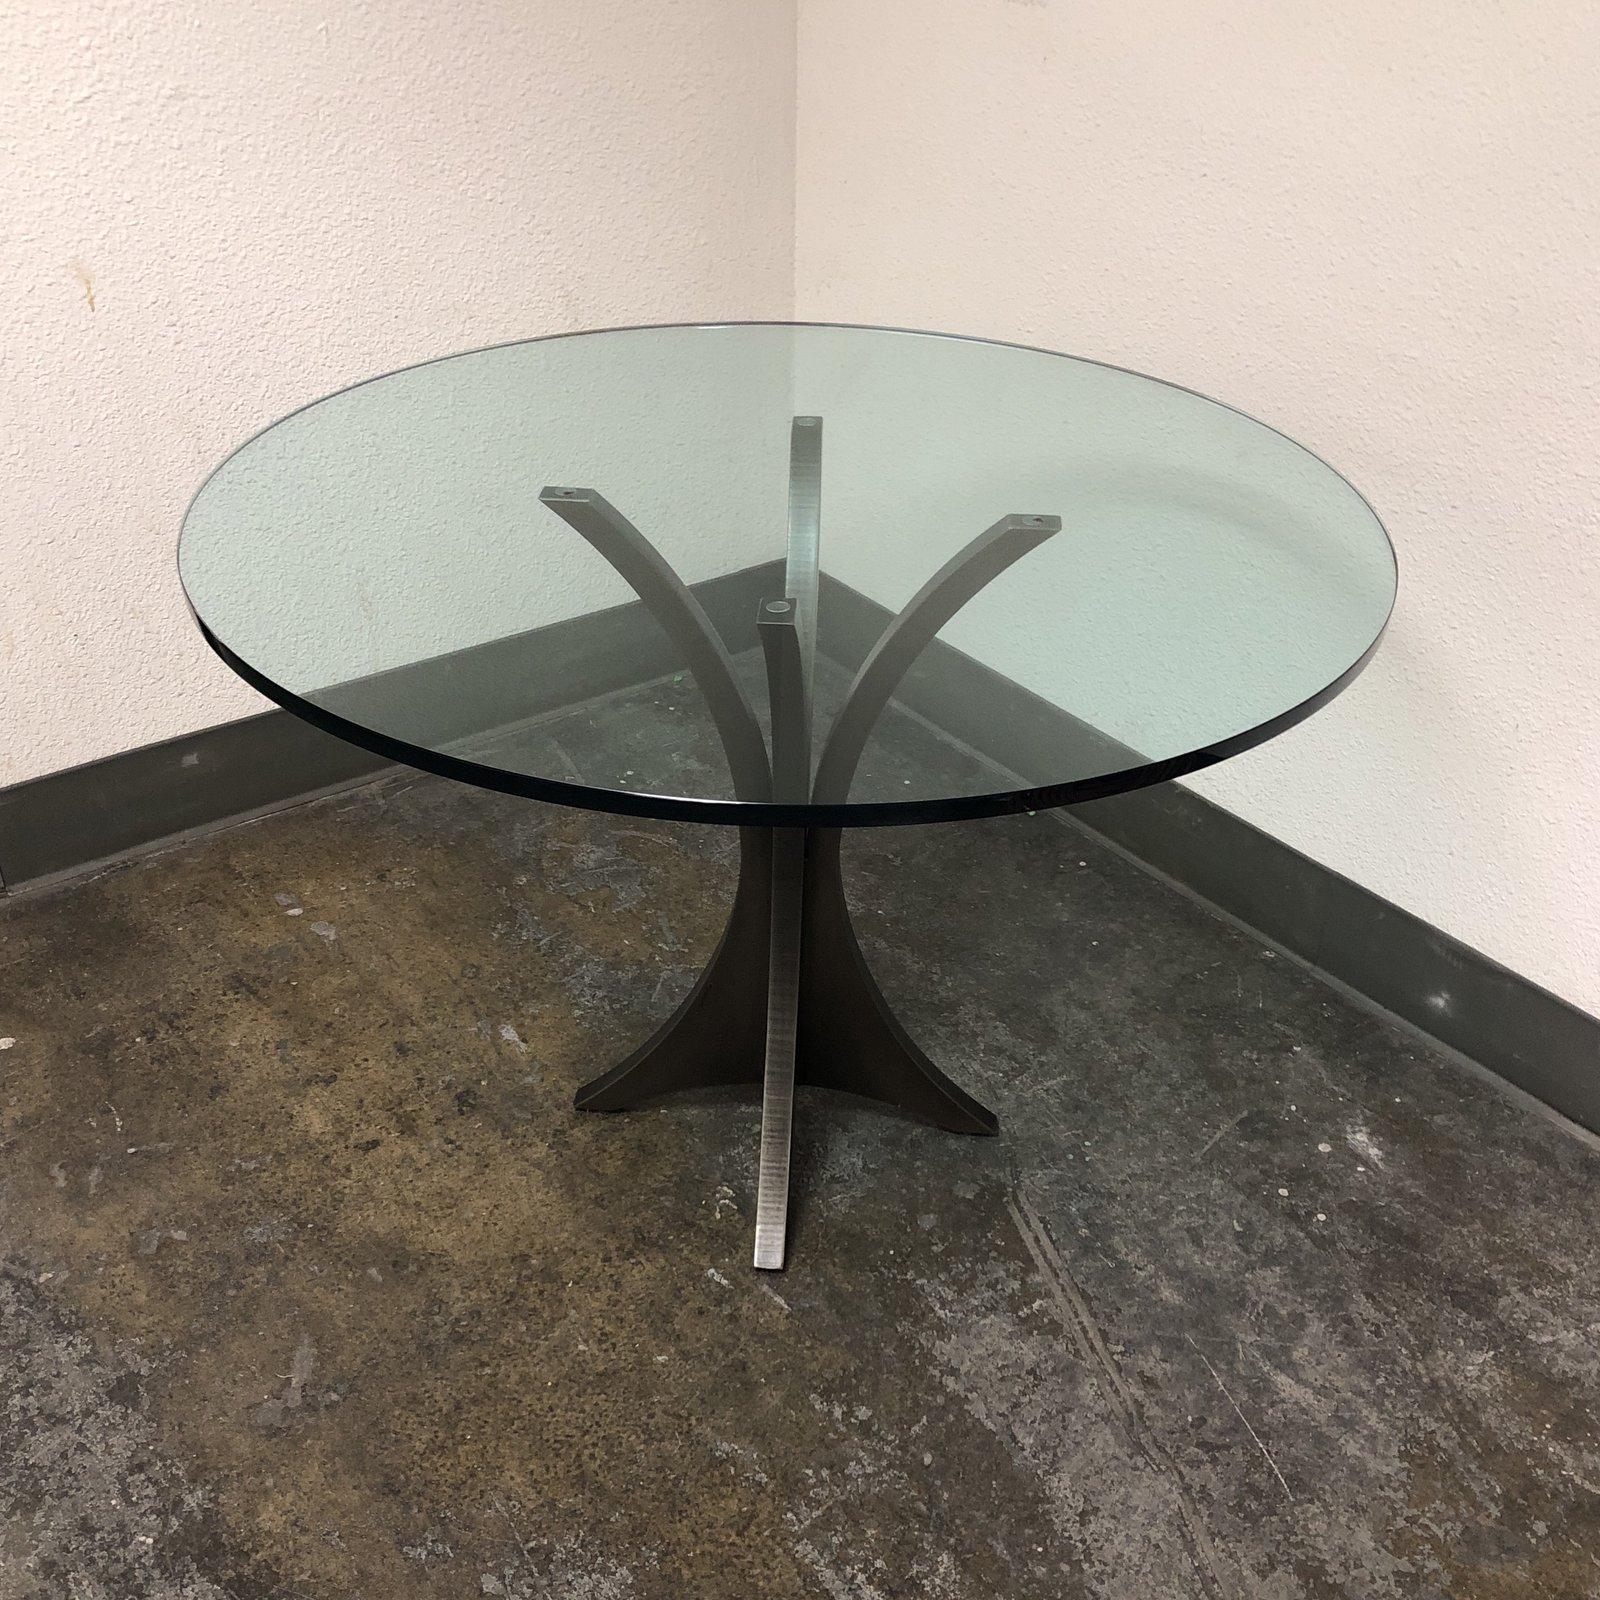 A custom round table. Settle down to a bowl of Modern-O's in your minimalist breakfast nook with this arched iron frame and thick glass kitchen table. A faint texture adds a natural feel to the solid pedestal iron bars.